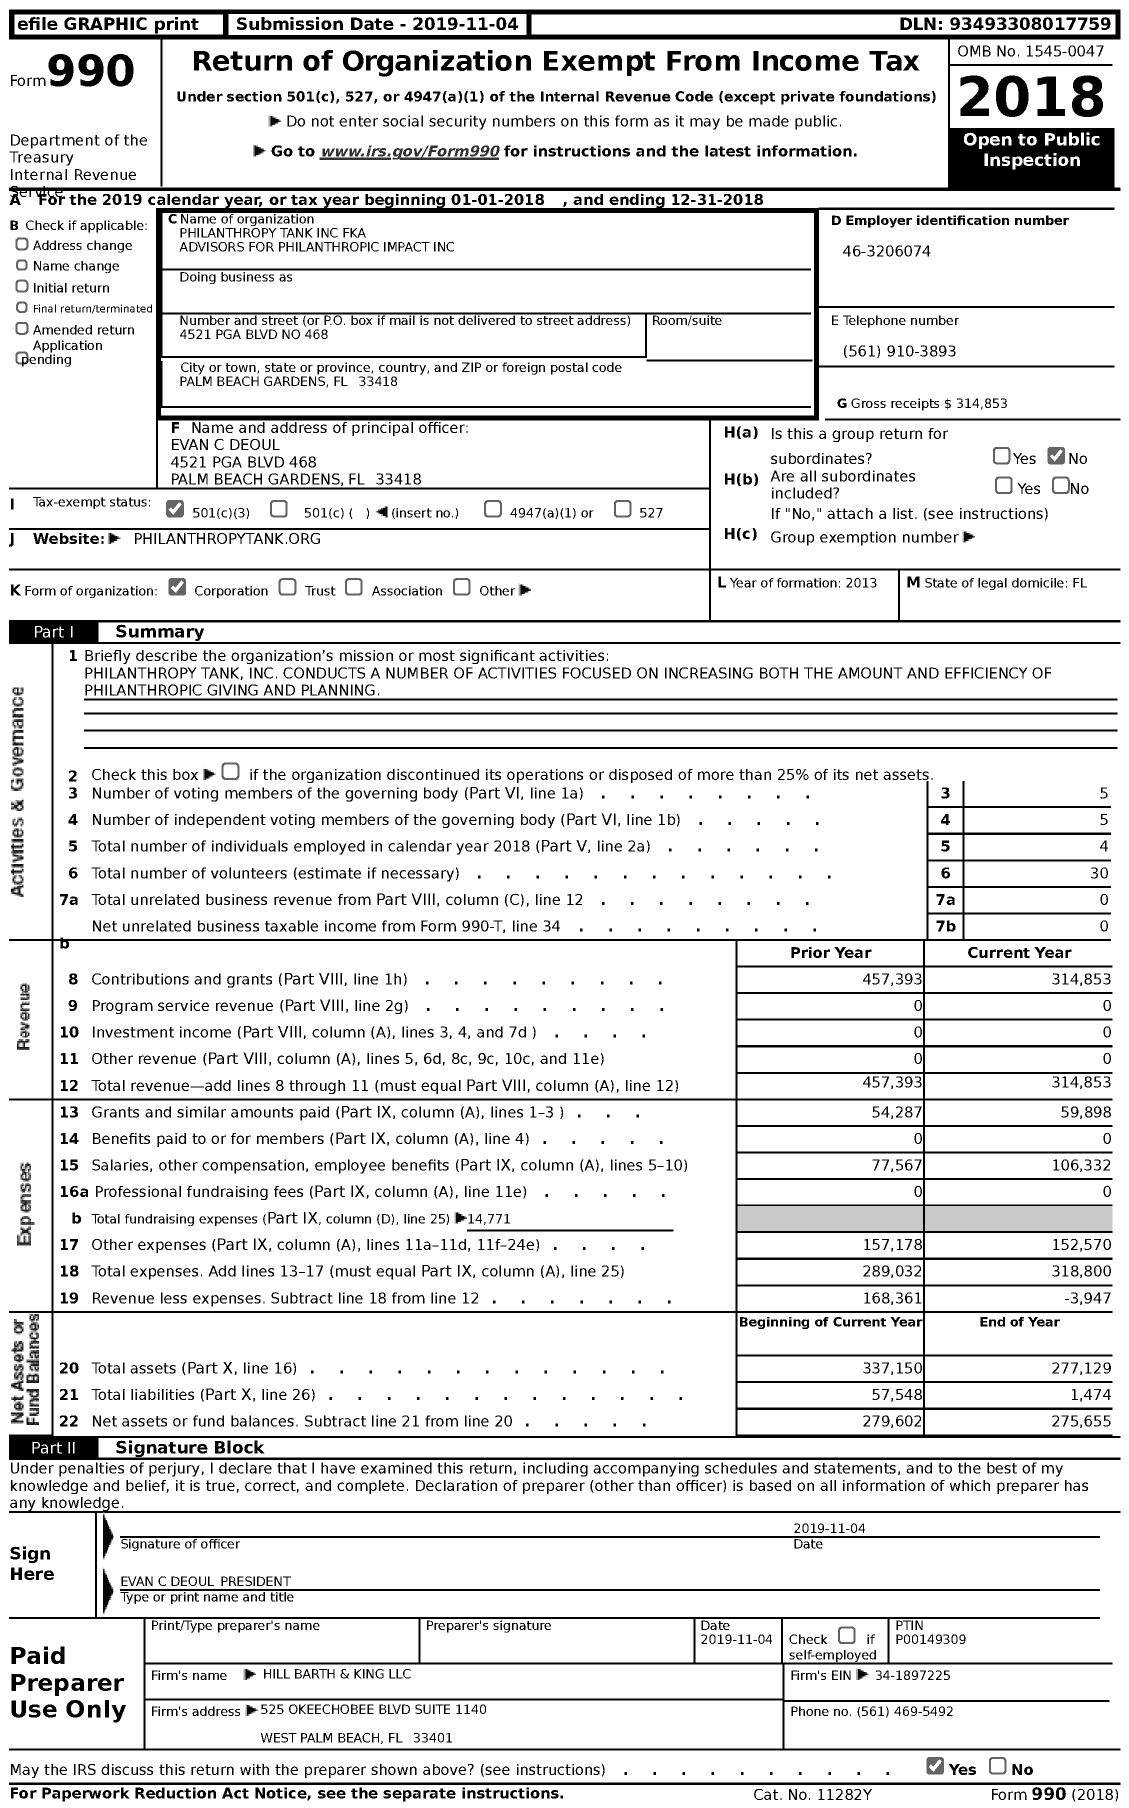 Image of first page of 2018 Form 990 for Philanthropy Tank